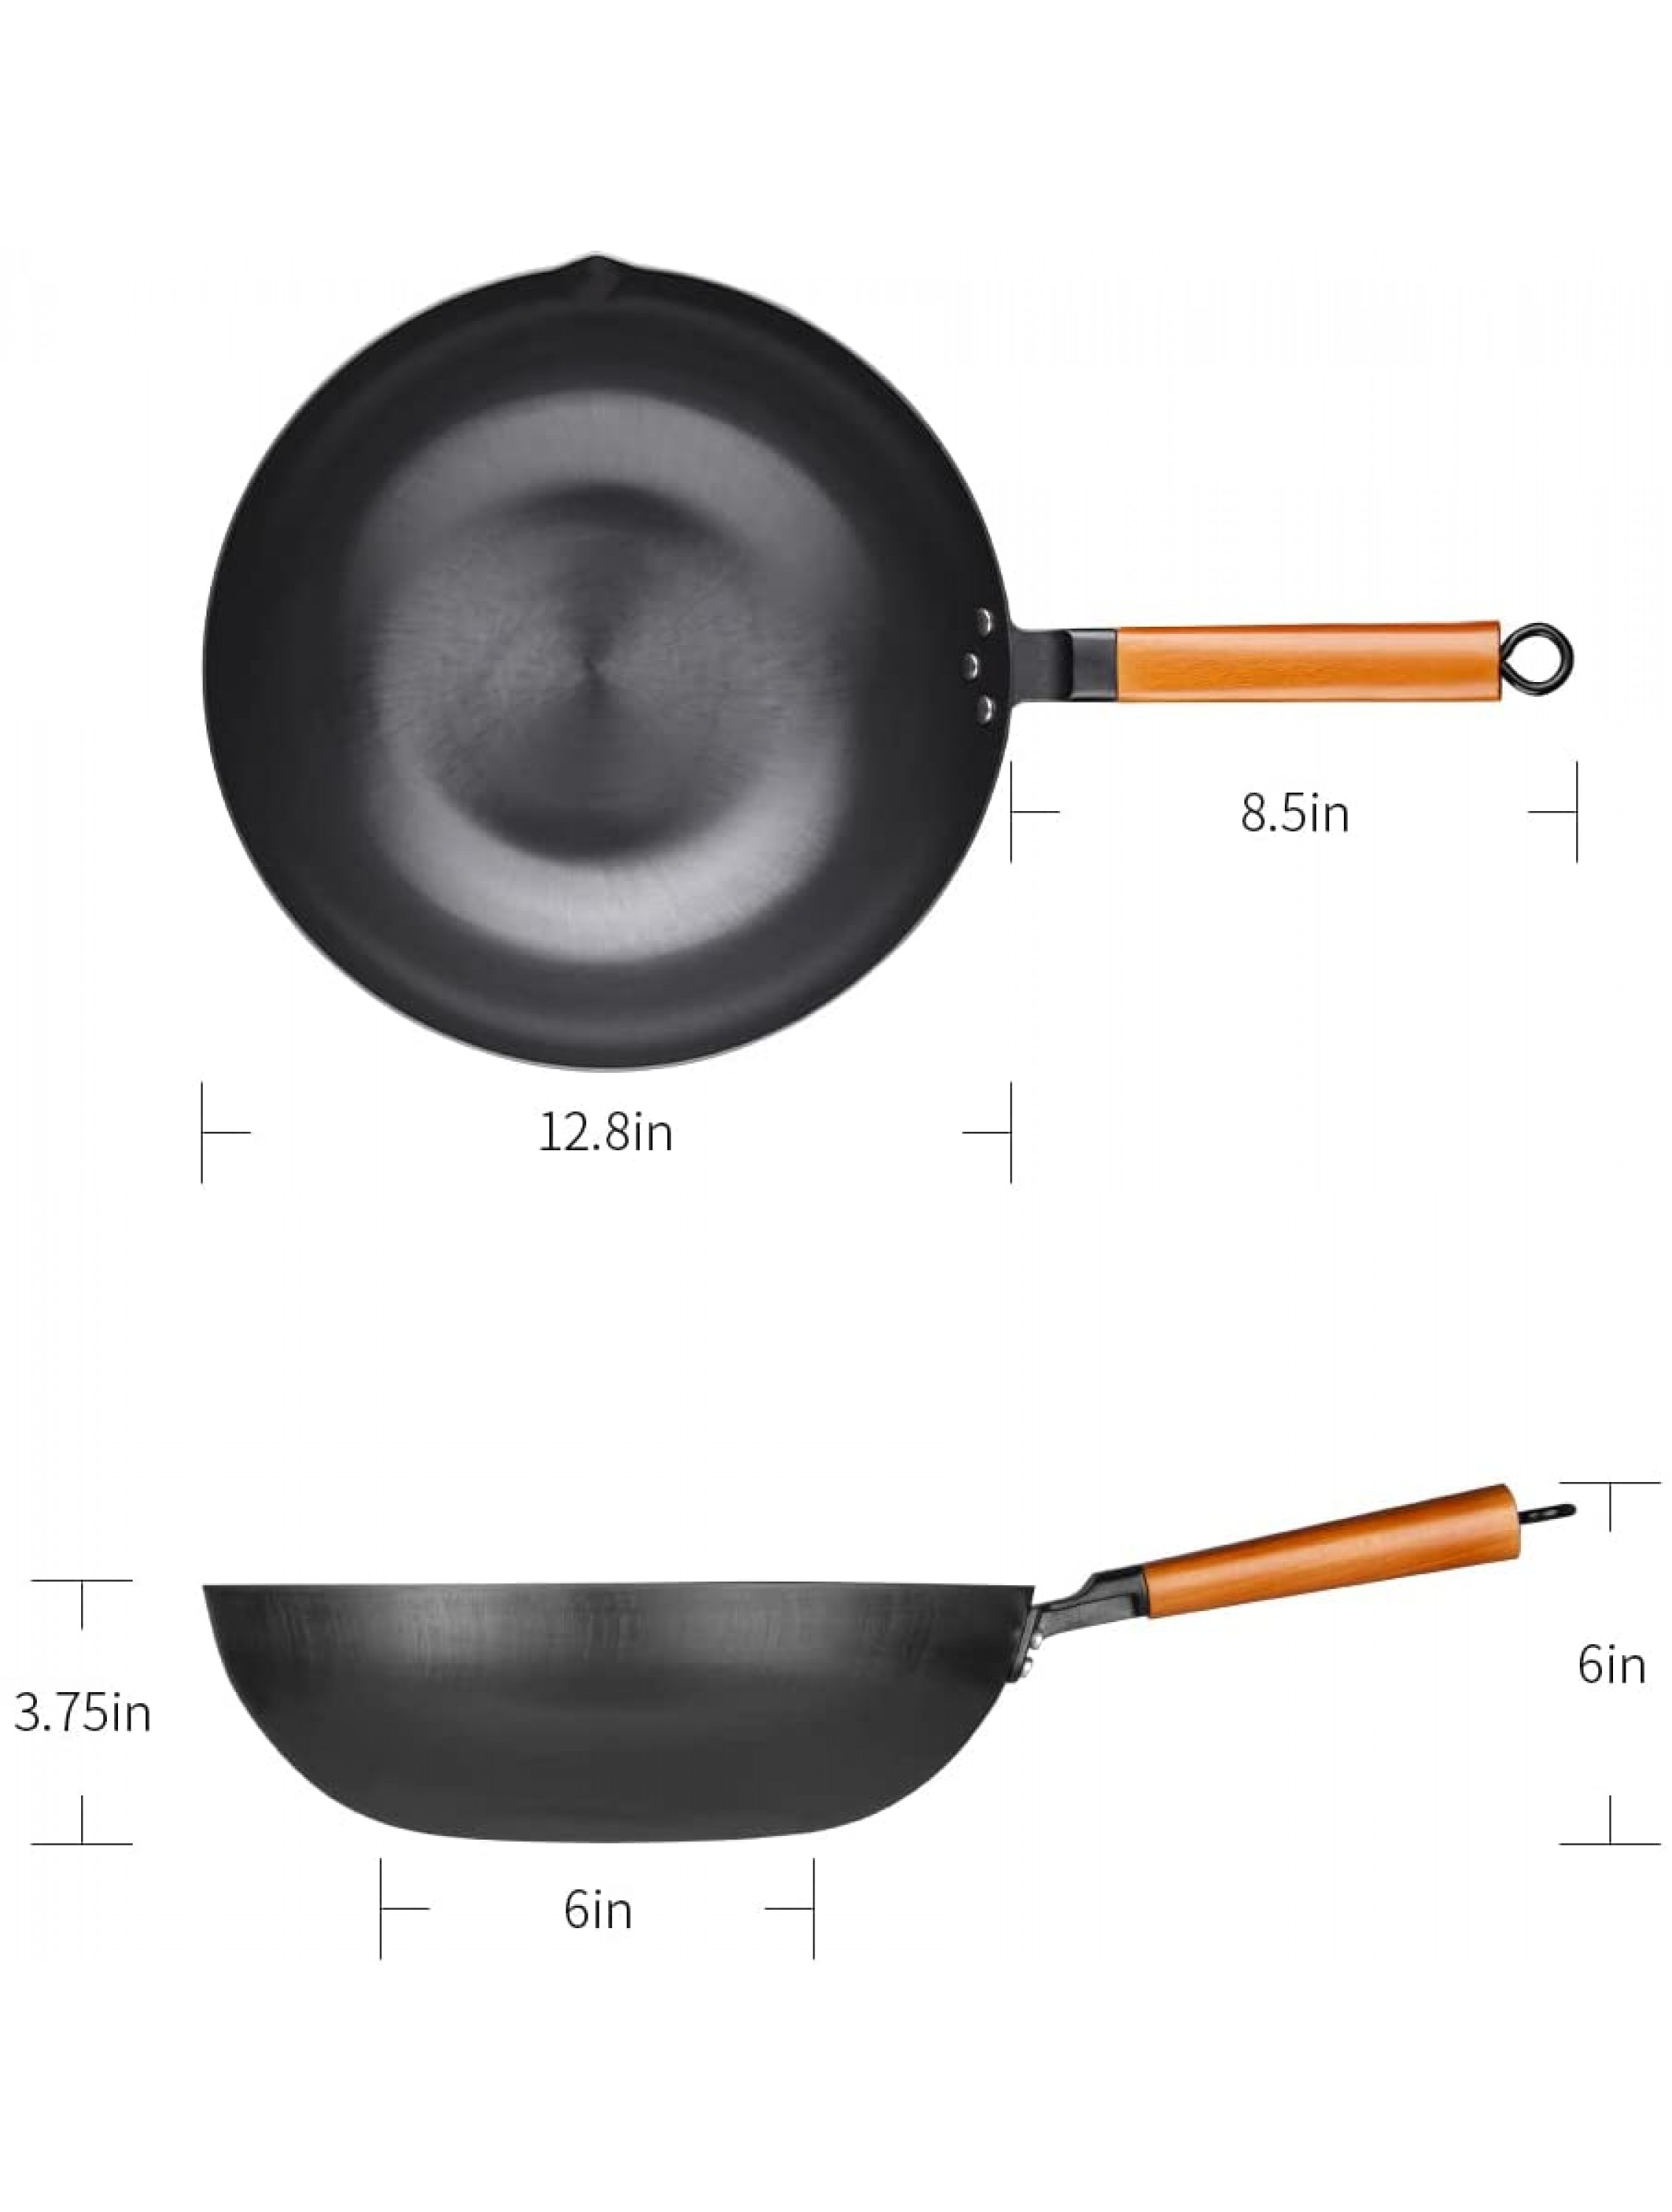 Natural Carbon Steel Wok Pan 12.5” No Nonstick Coating Woks and Stir Fry Pans 100% No Chemical Traditional Chinese Iron Pot with Wooden Handle Flat Bottom for Seasoning All Stoves -Black Steel Wok - BRA8TWJ5X